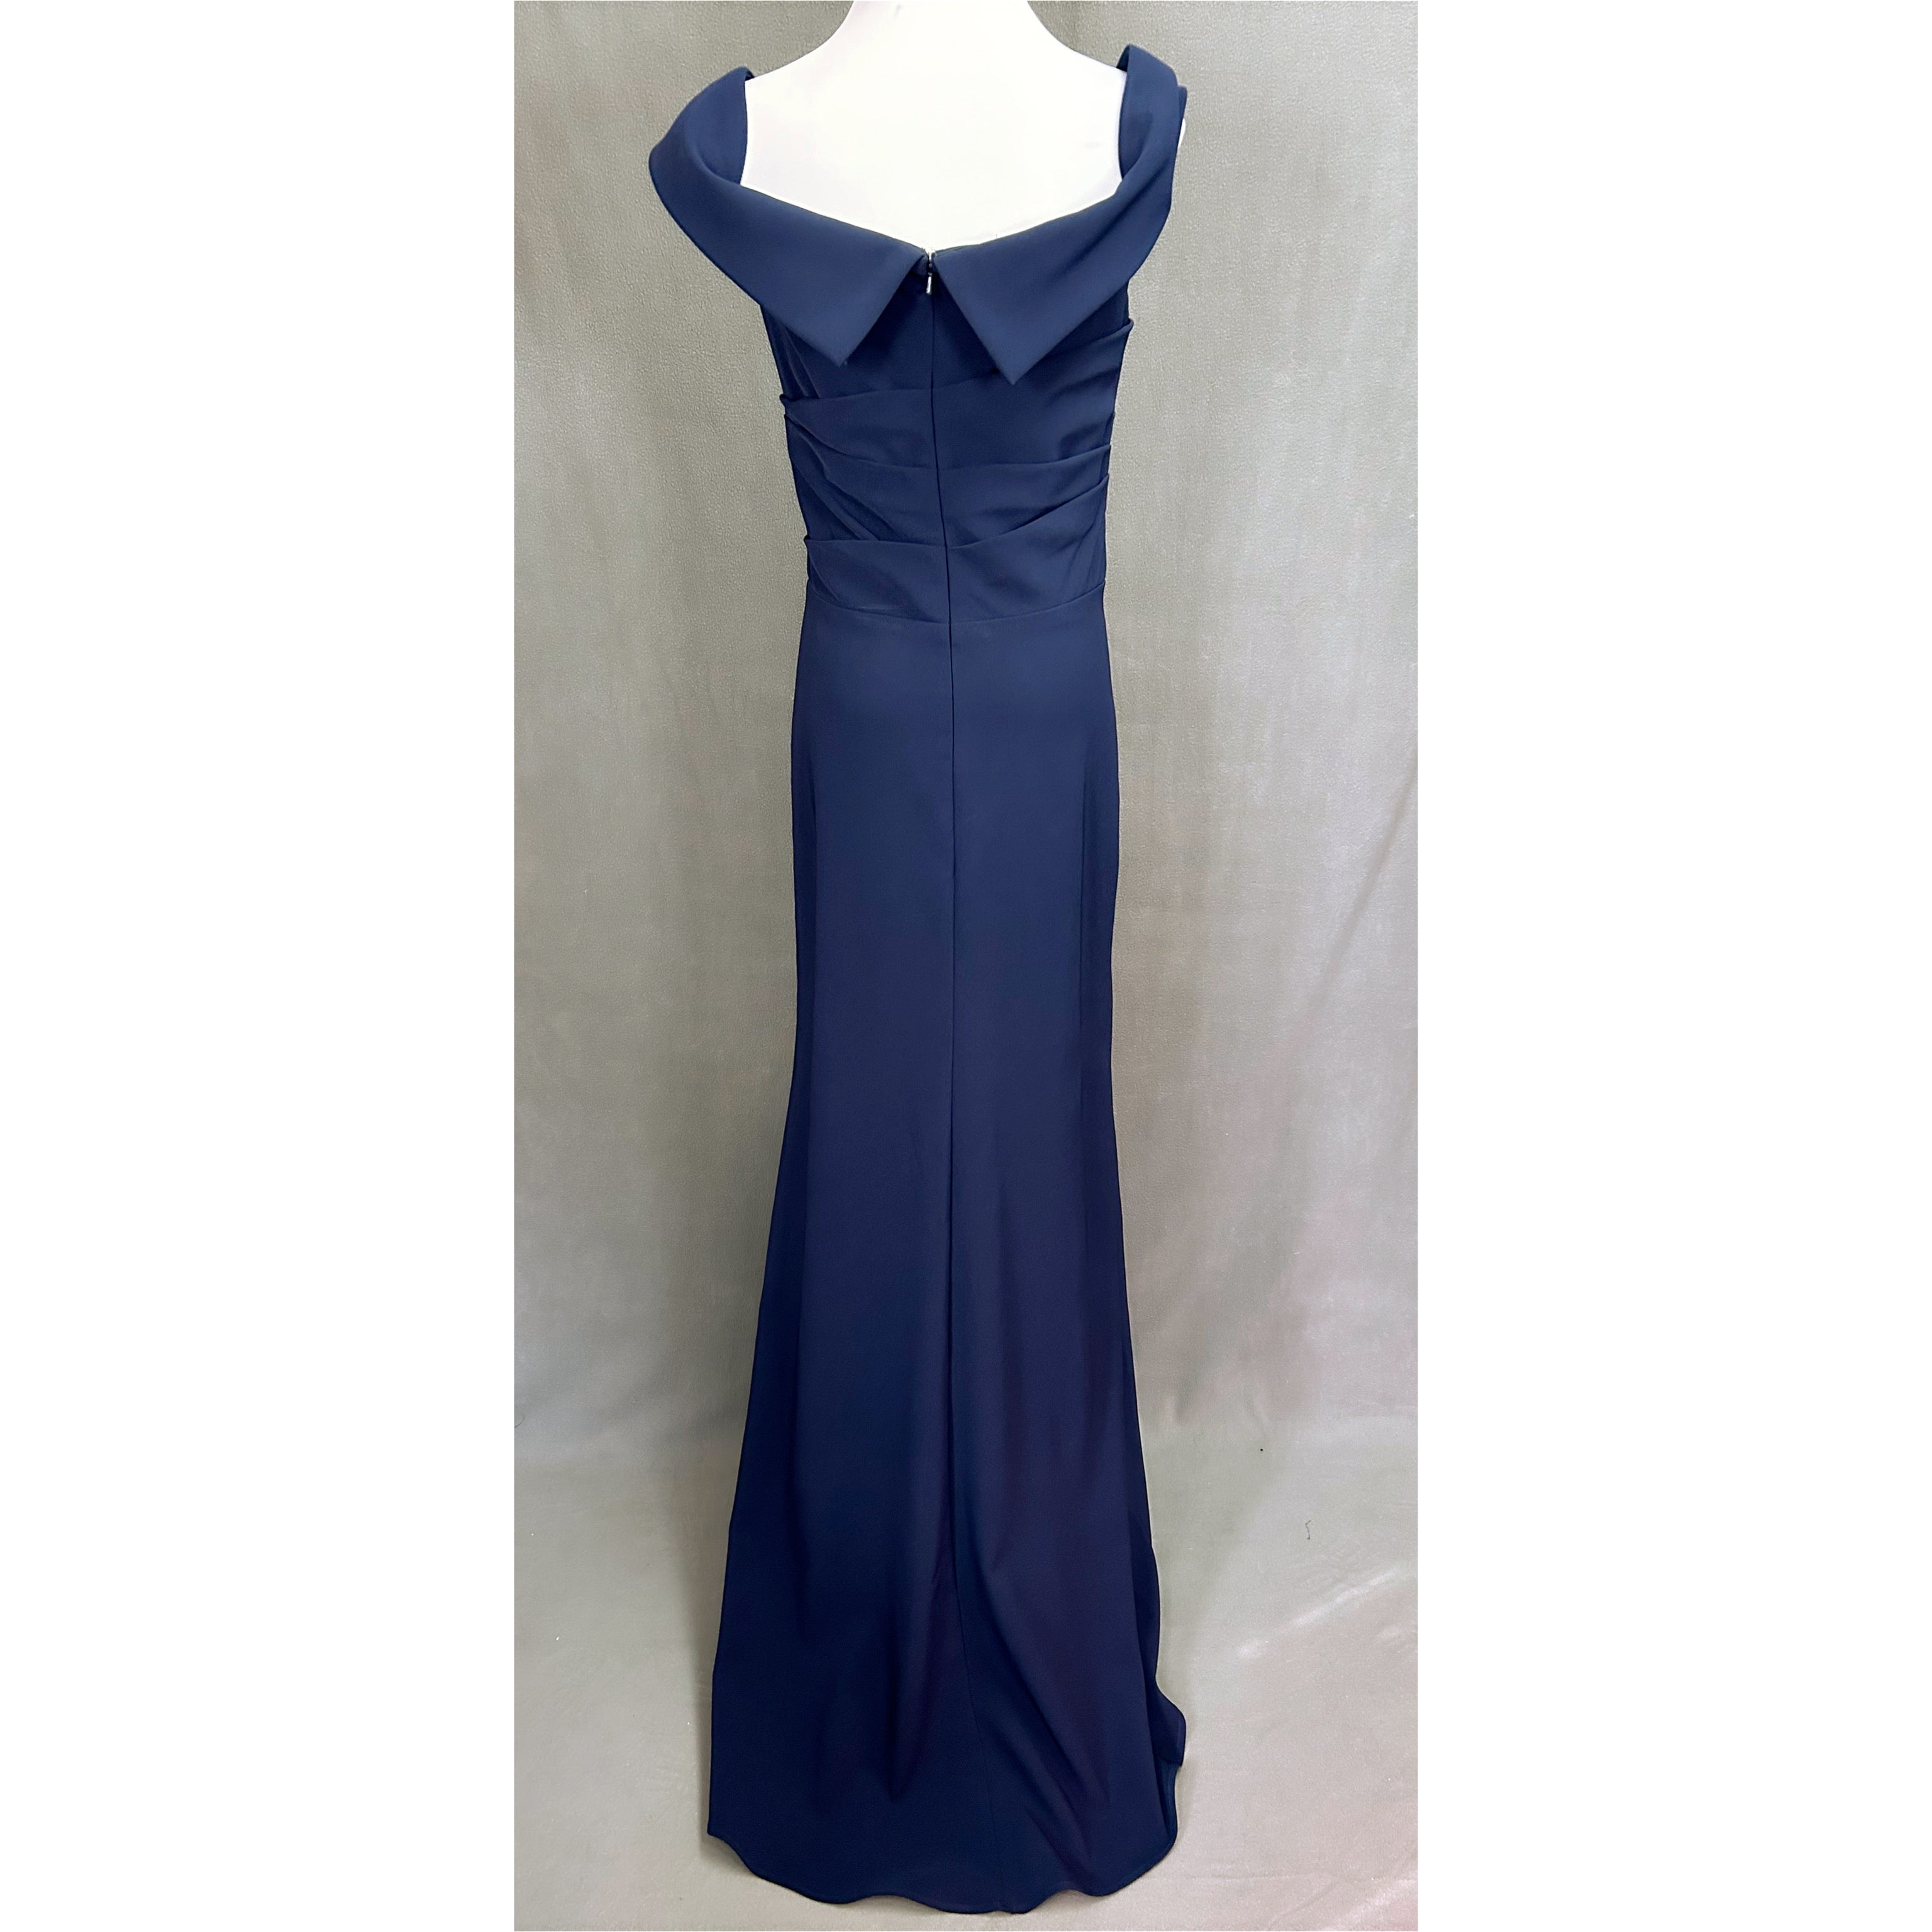 MGNY navy dress, size 6, NEW WITH TAGS!